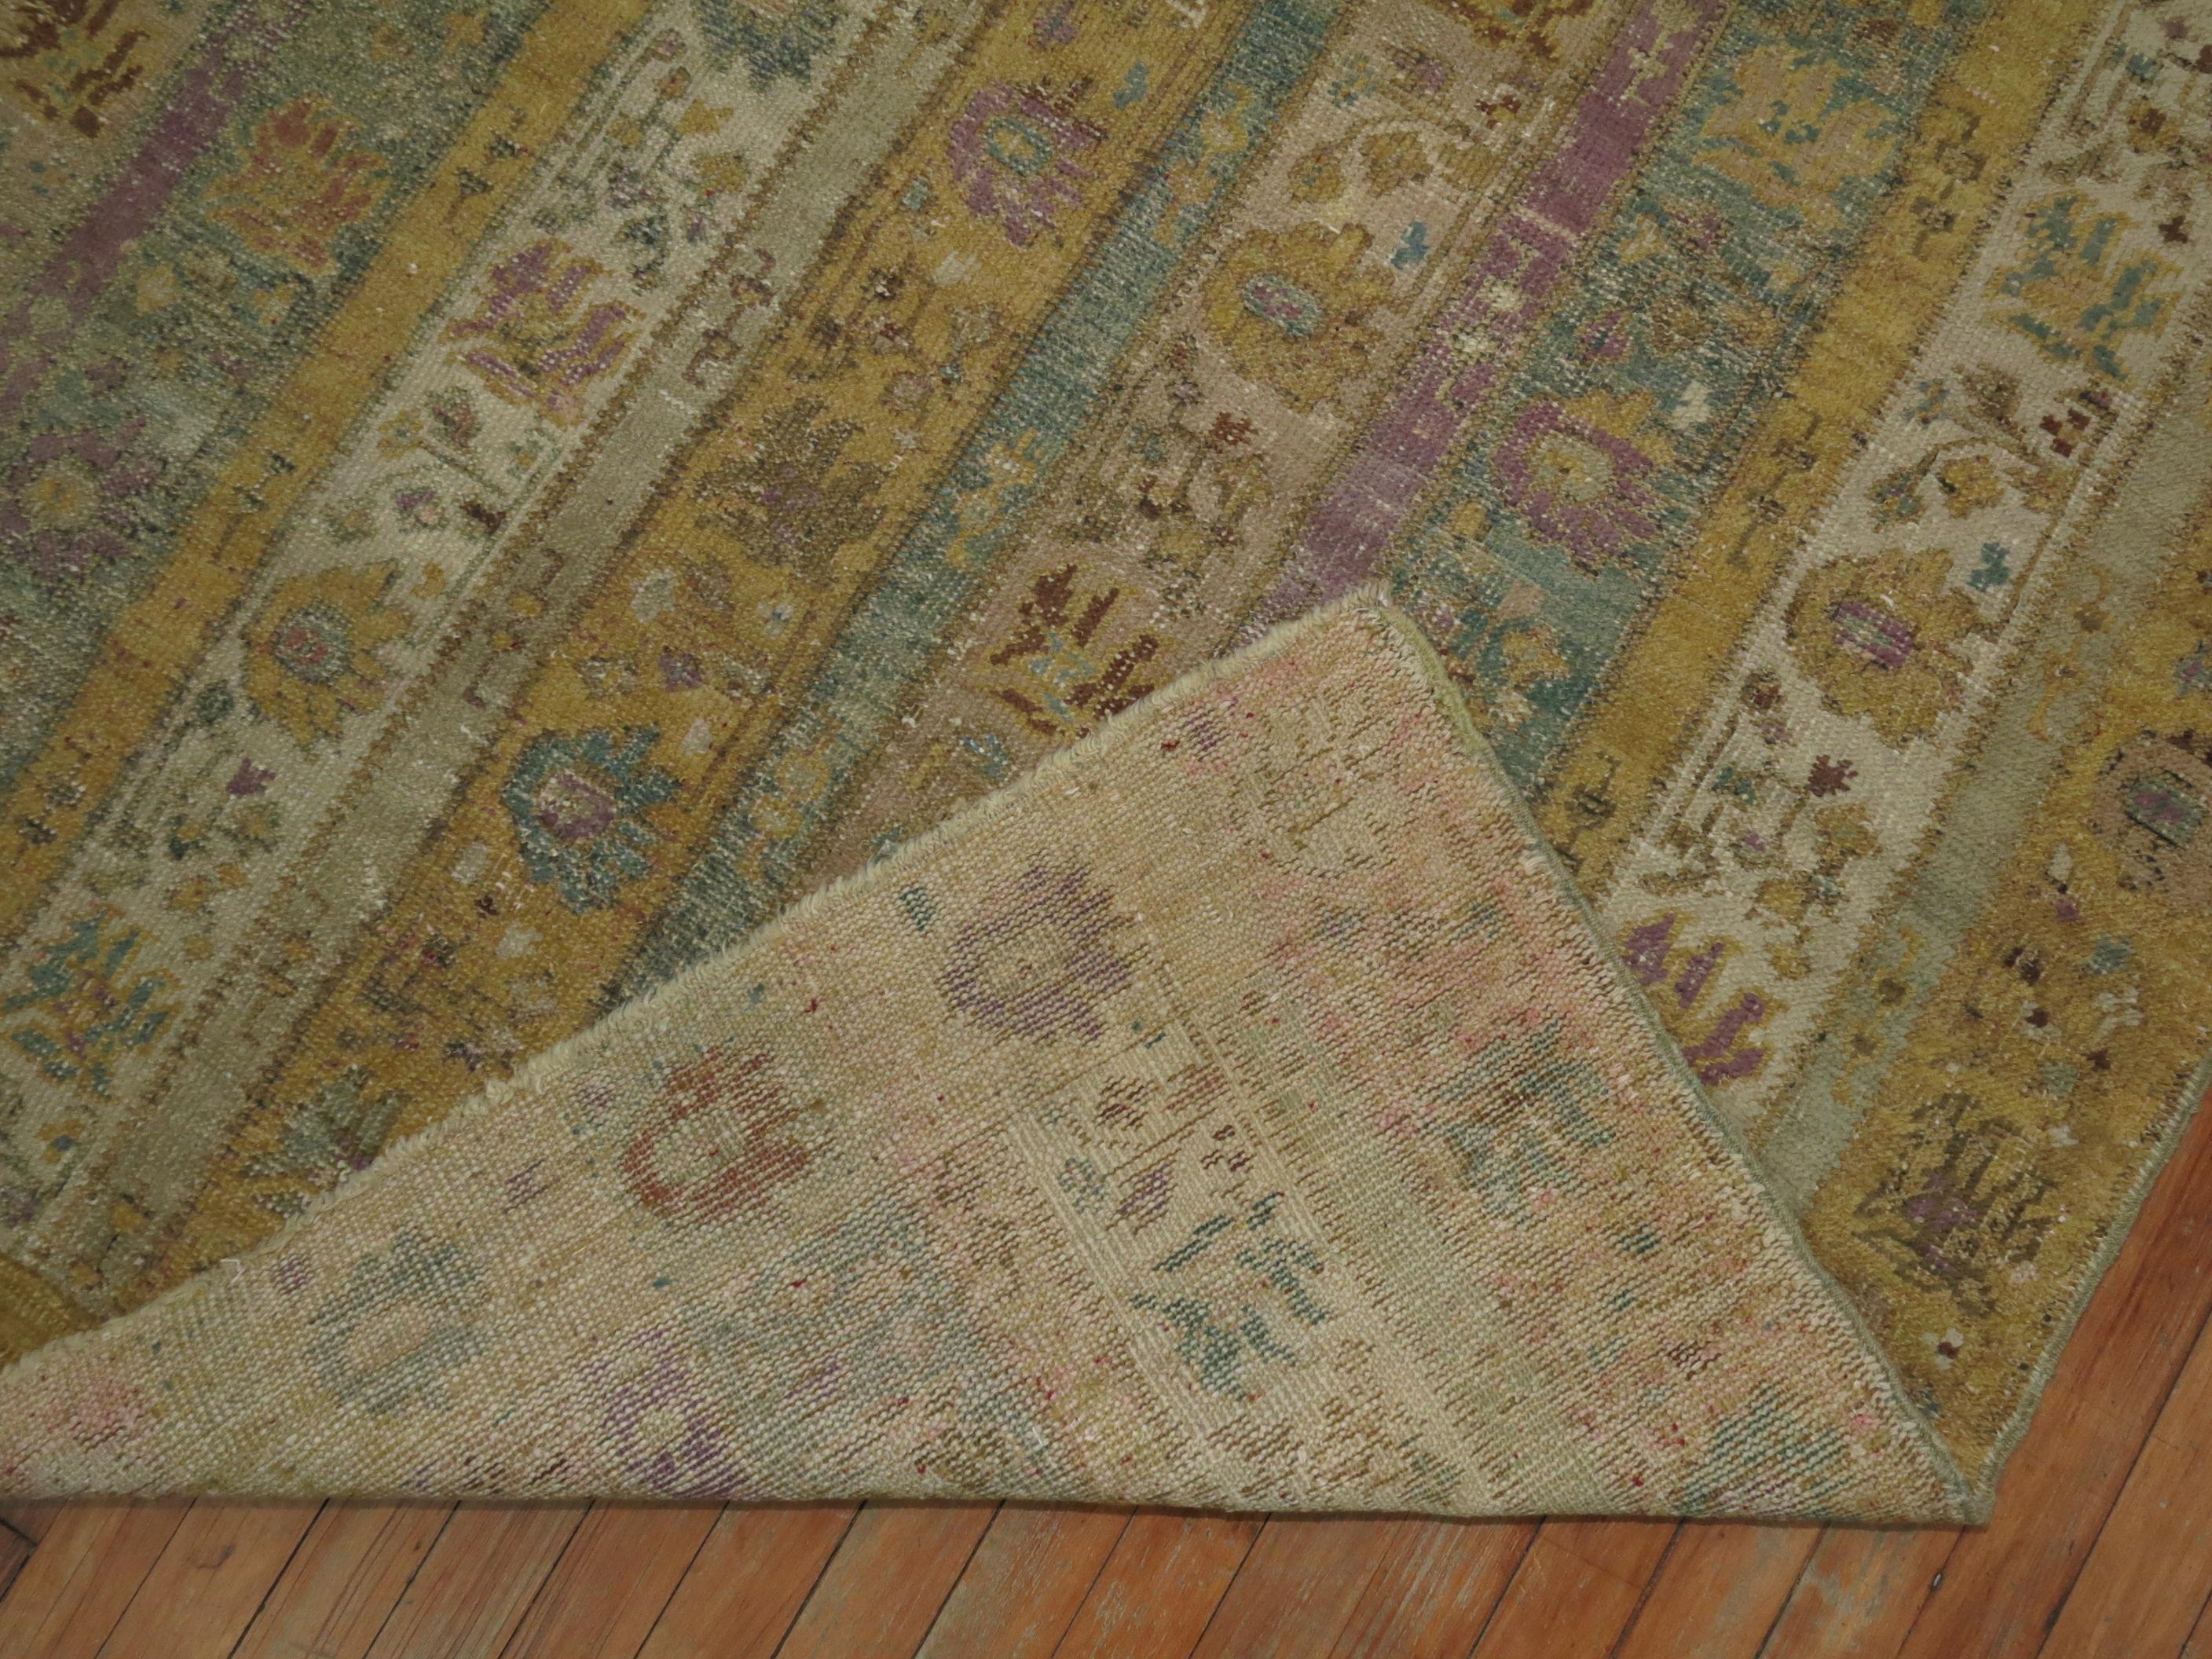 20th Century Square Turkish Ghiordes Rug in Plum, Sand Khaki, Celadon Accents For Sale